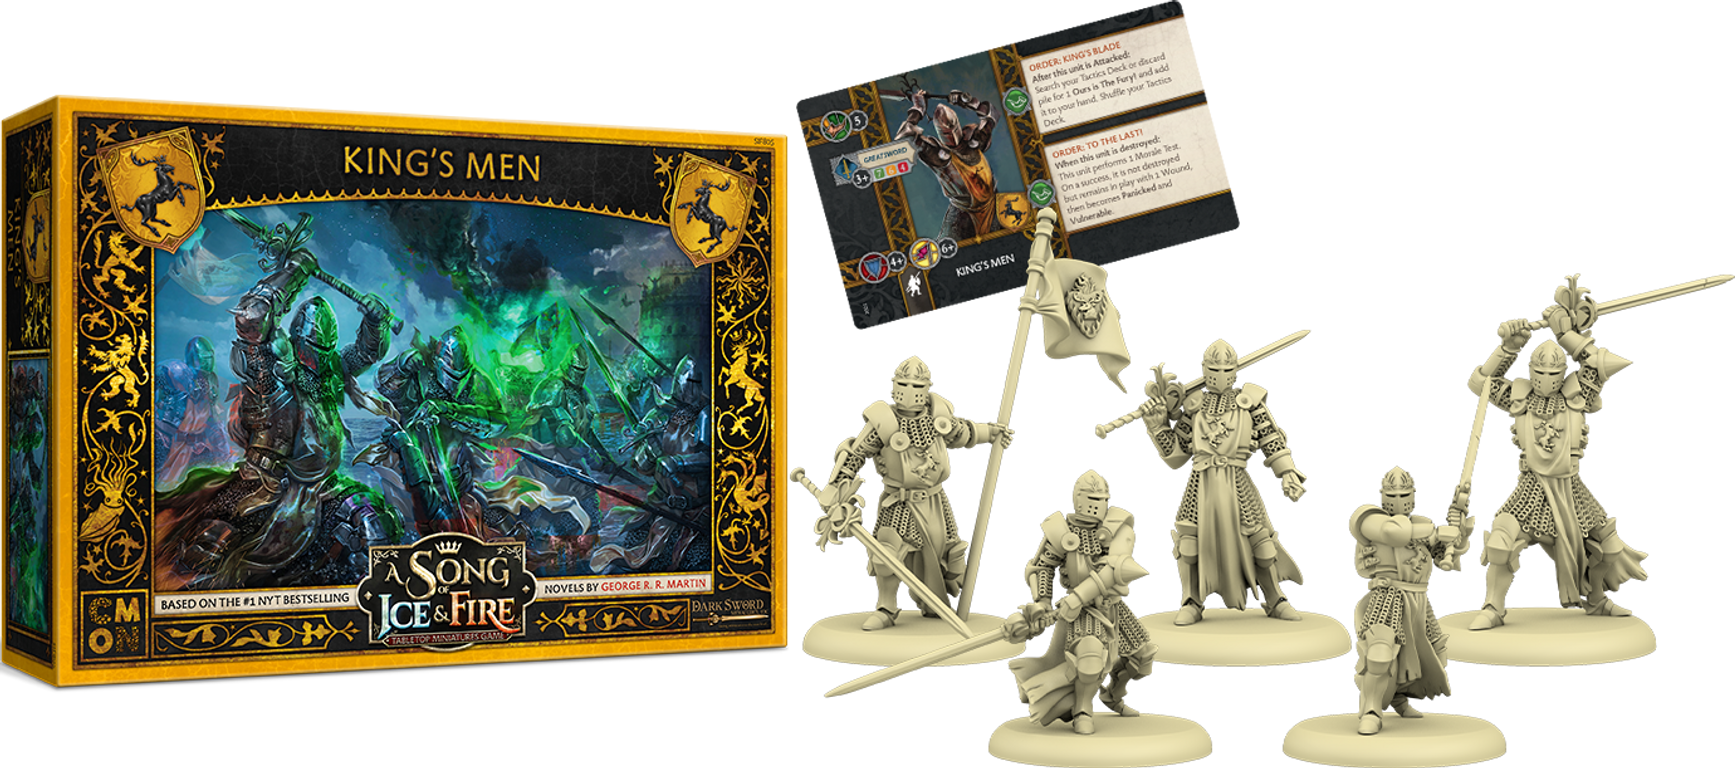 A Song of Ice & Fire: Tabletop Miniatures Game – King's Men components